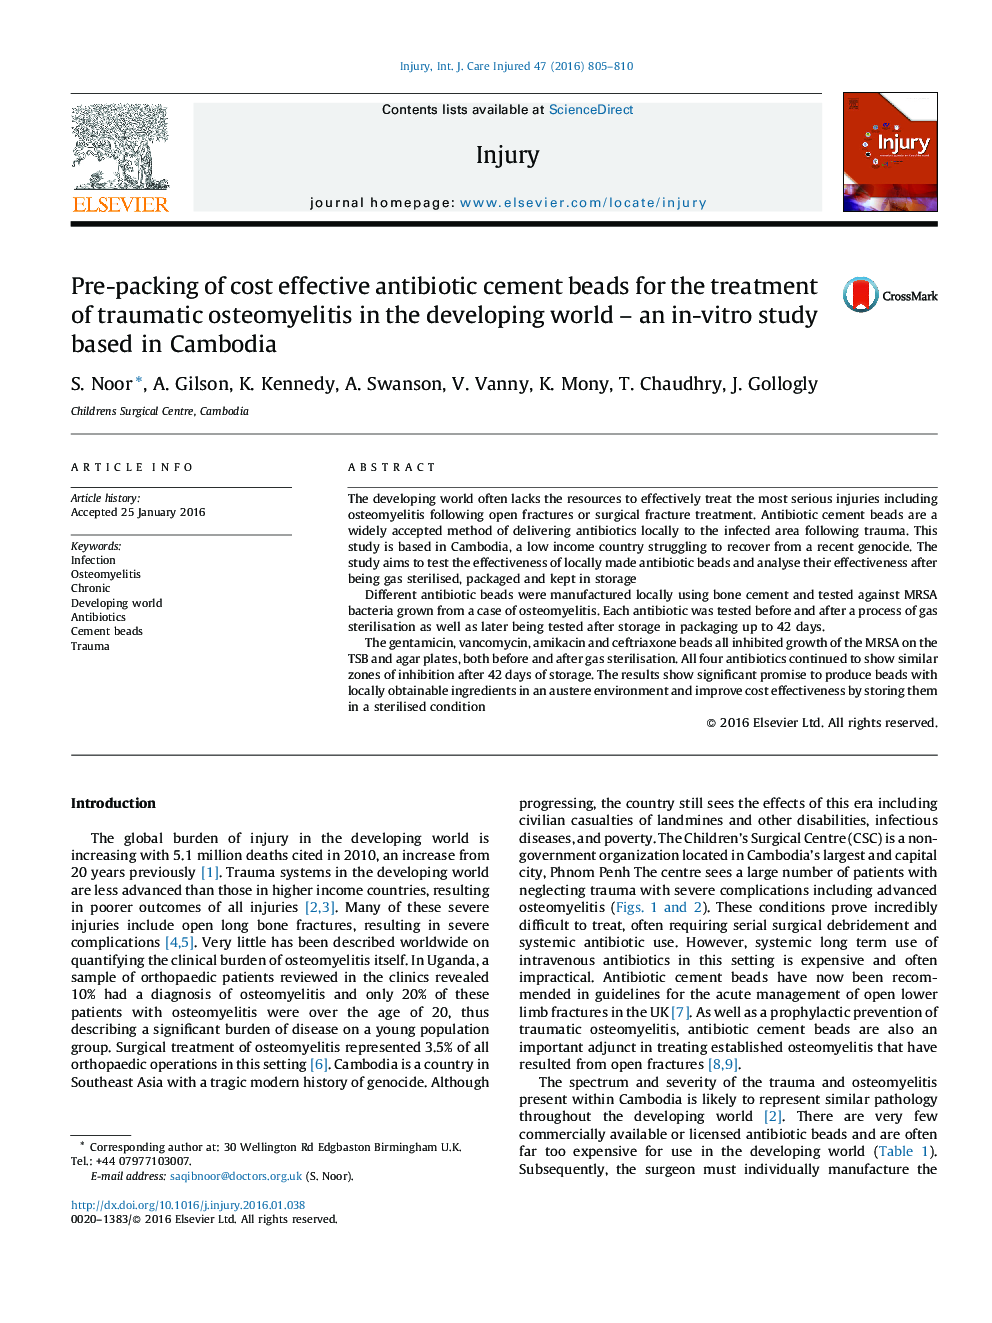 Pre-packing of cost effective antibiotic cement beads for the treatment of traumatic osteomyelitis in the developing world – an in-vitro study based in Cambodia